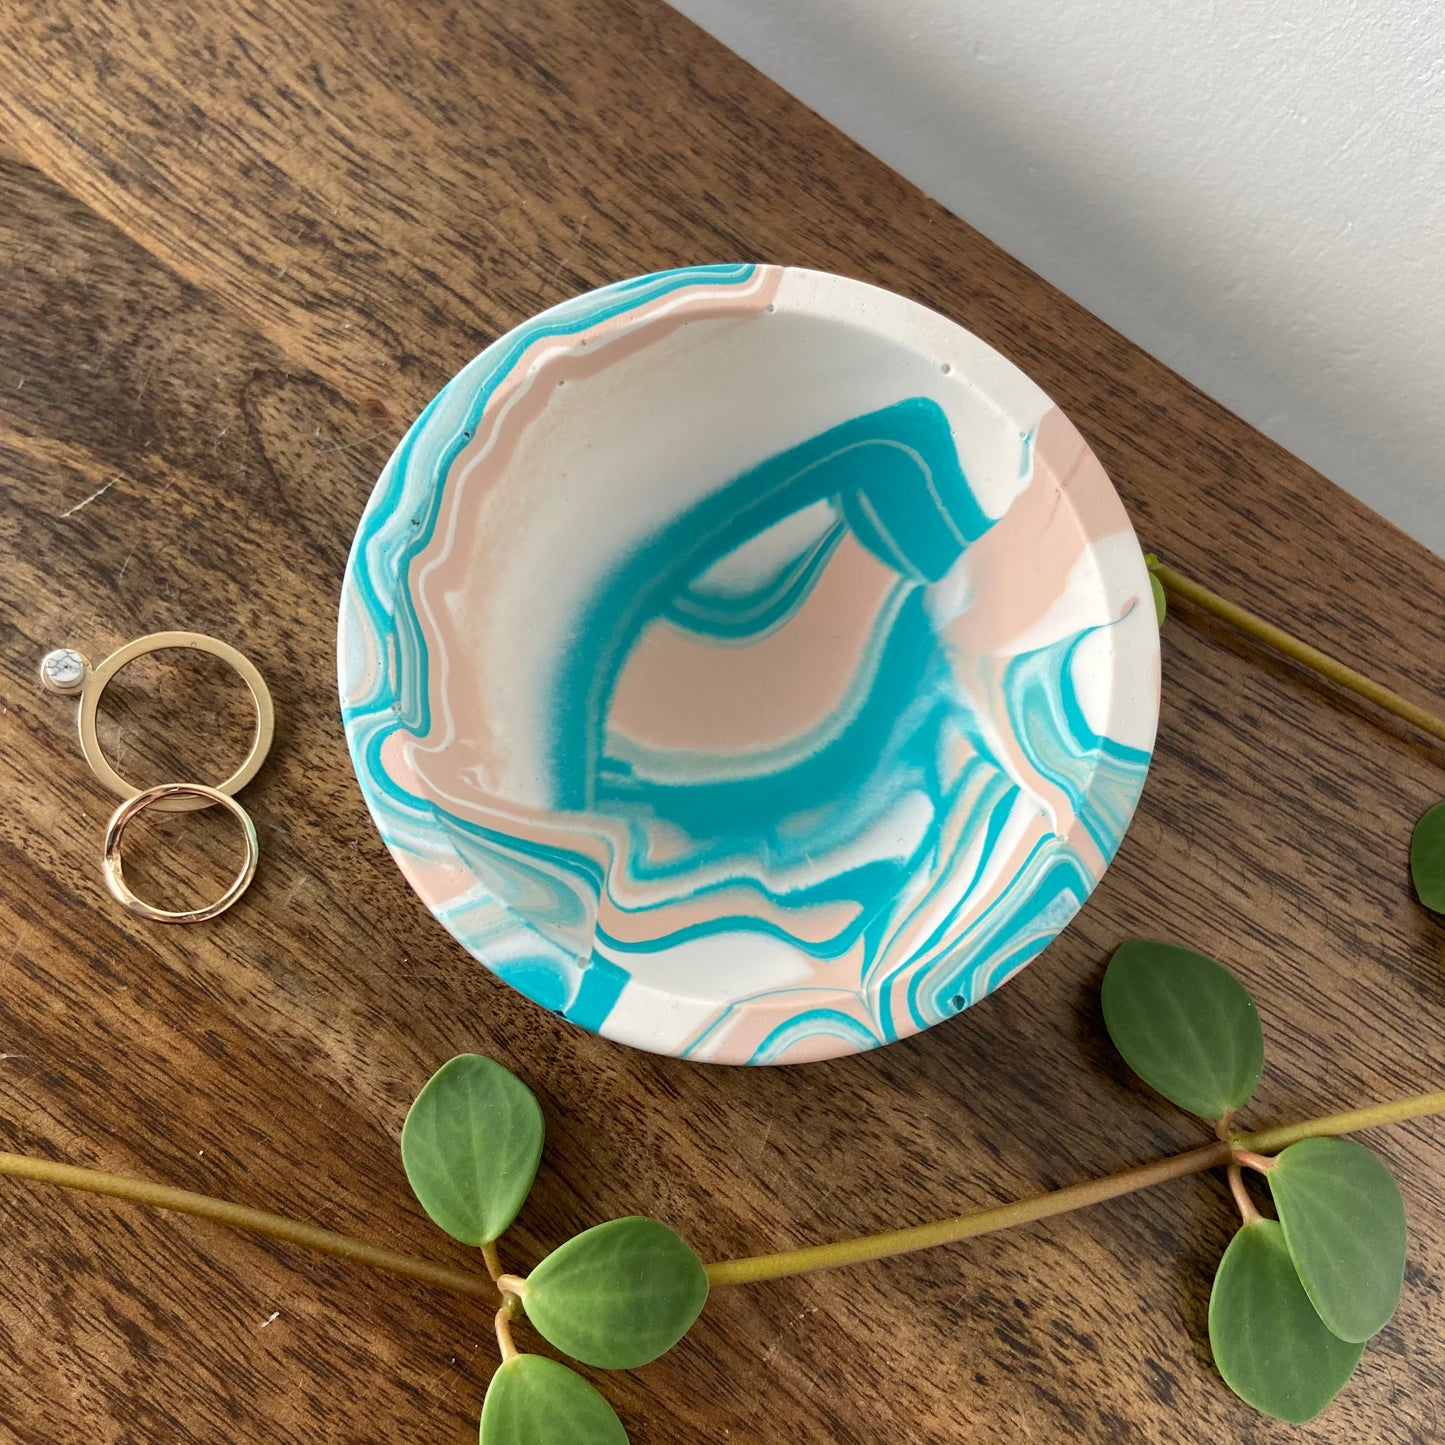 Trinket dish in marbled teal, white + pink